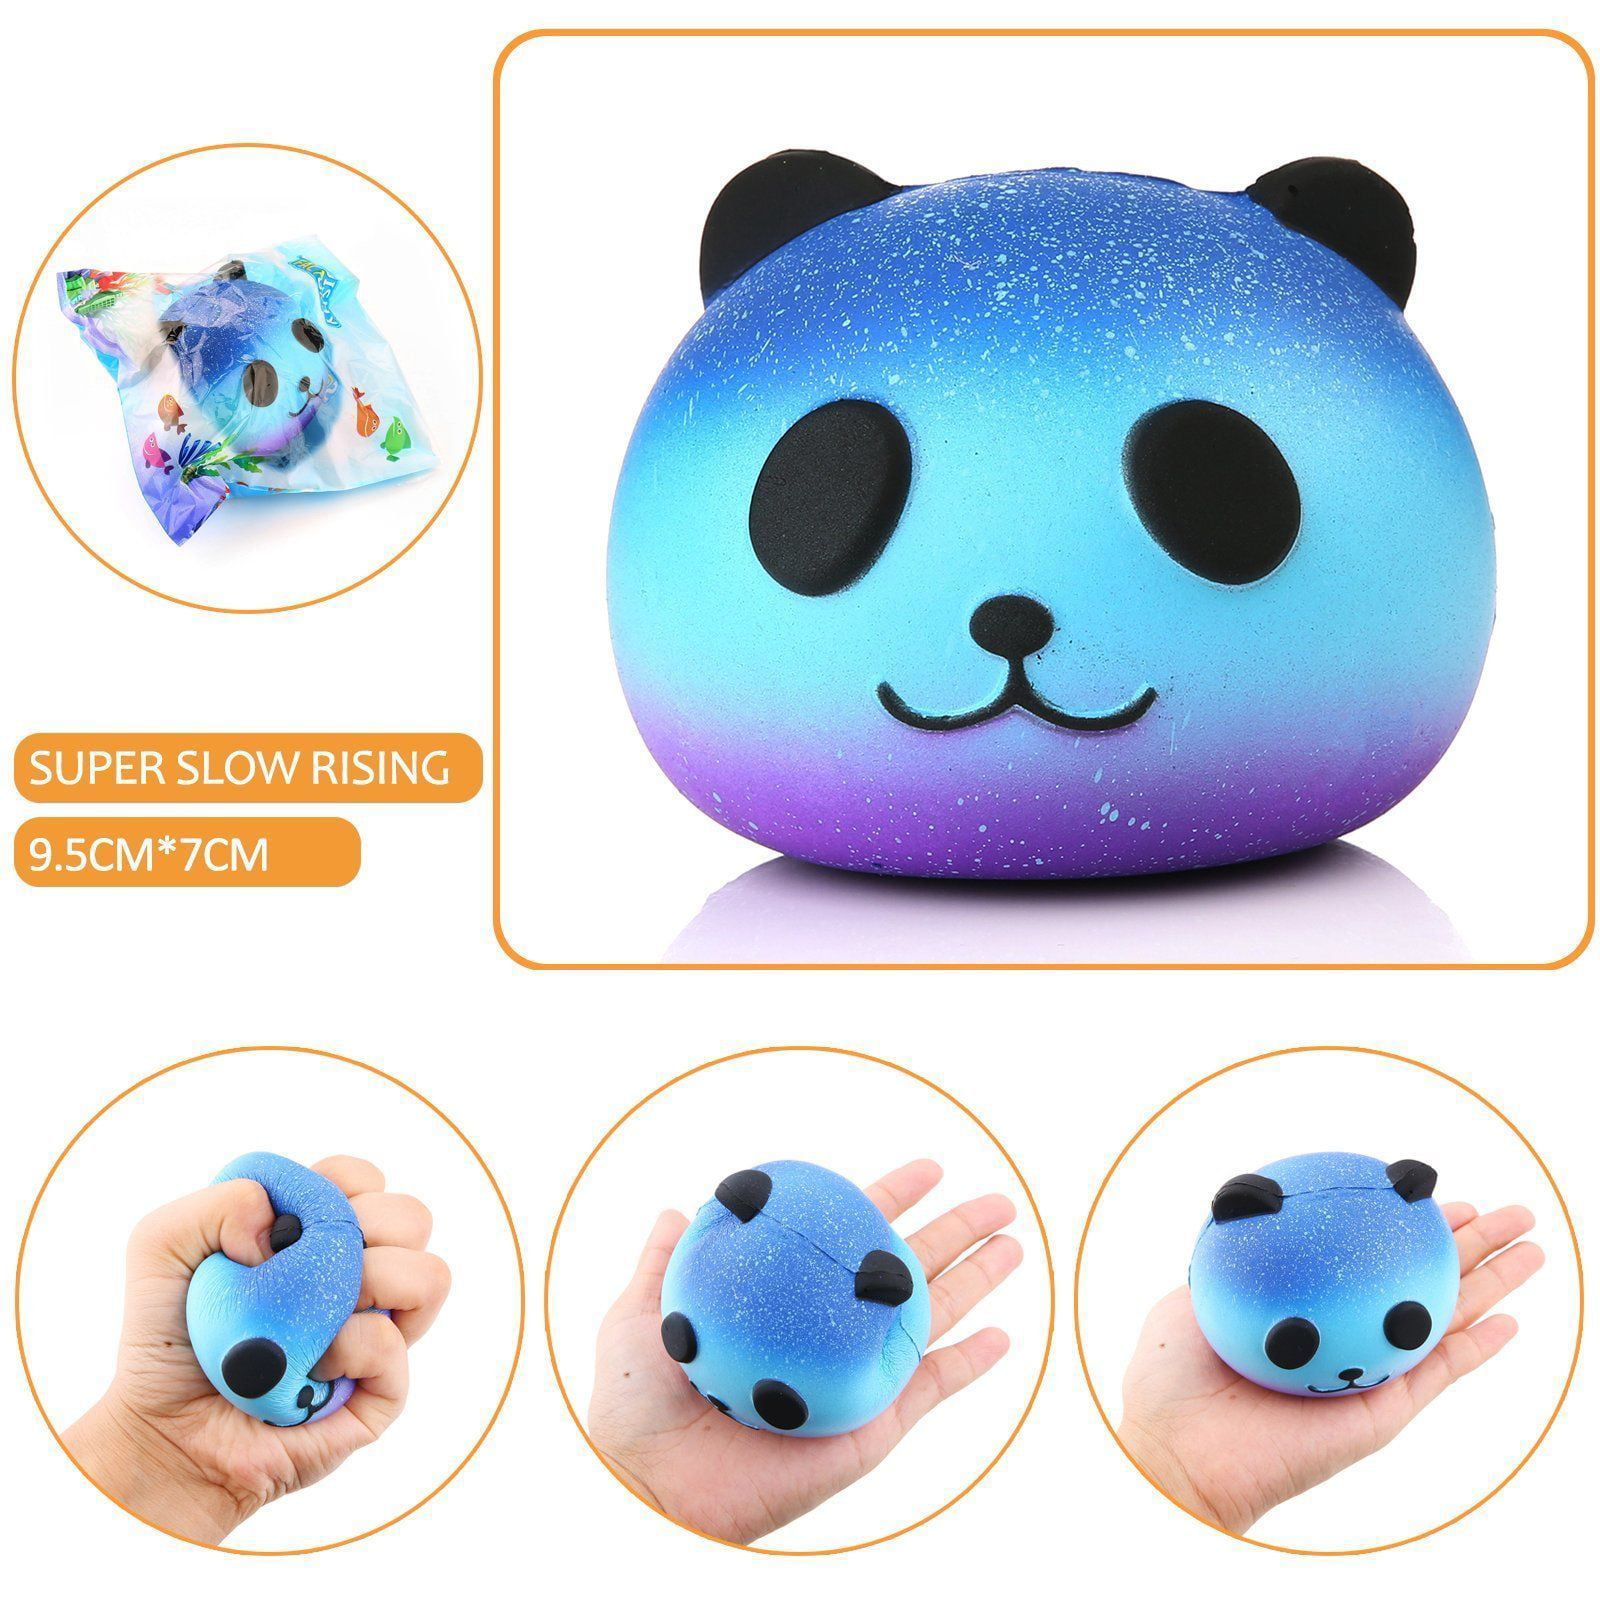 Scented Slow Rising Squishy Simulation Gift Cartoon Galaxy Kitty Kids &Adults Decompression Squeeze Toys Educational Hop Decorative Props Toys Franterd Stress Reliever Kawaii Toy 